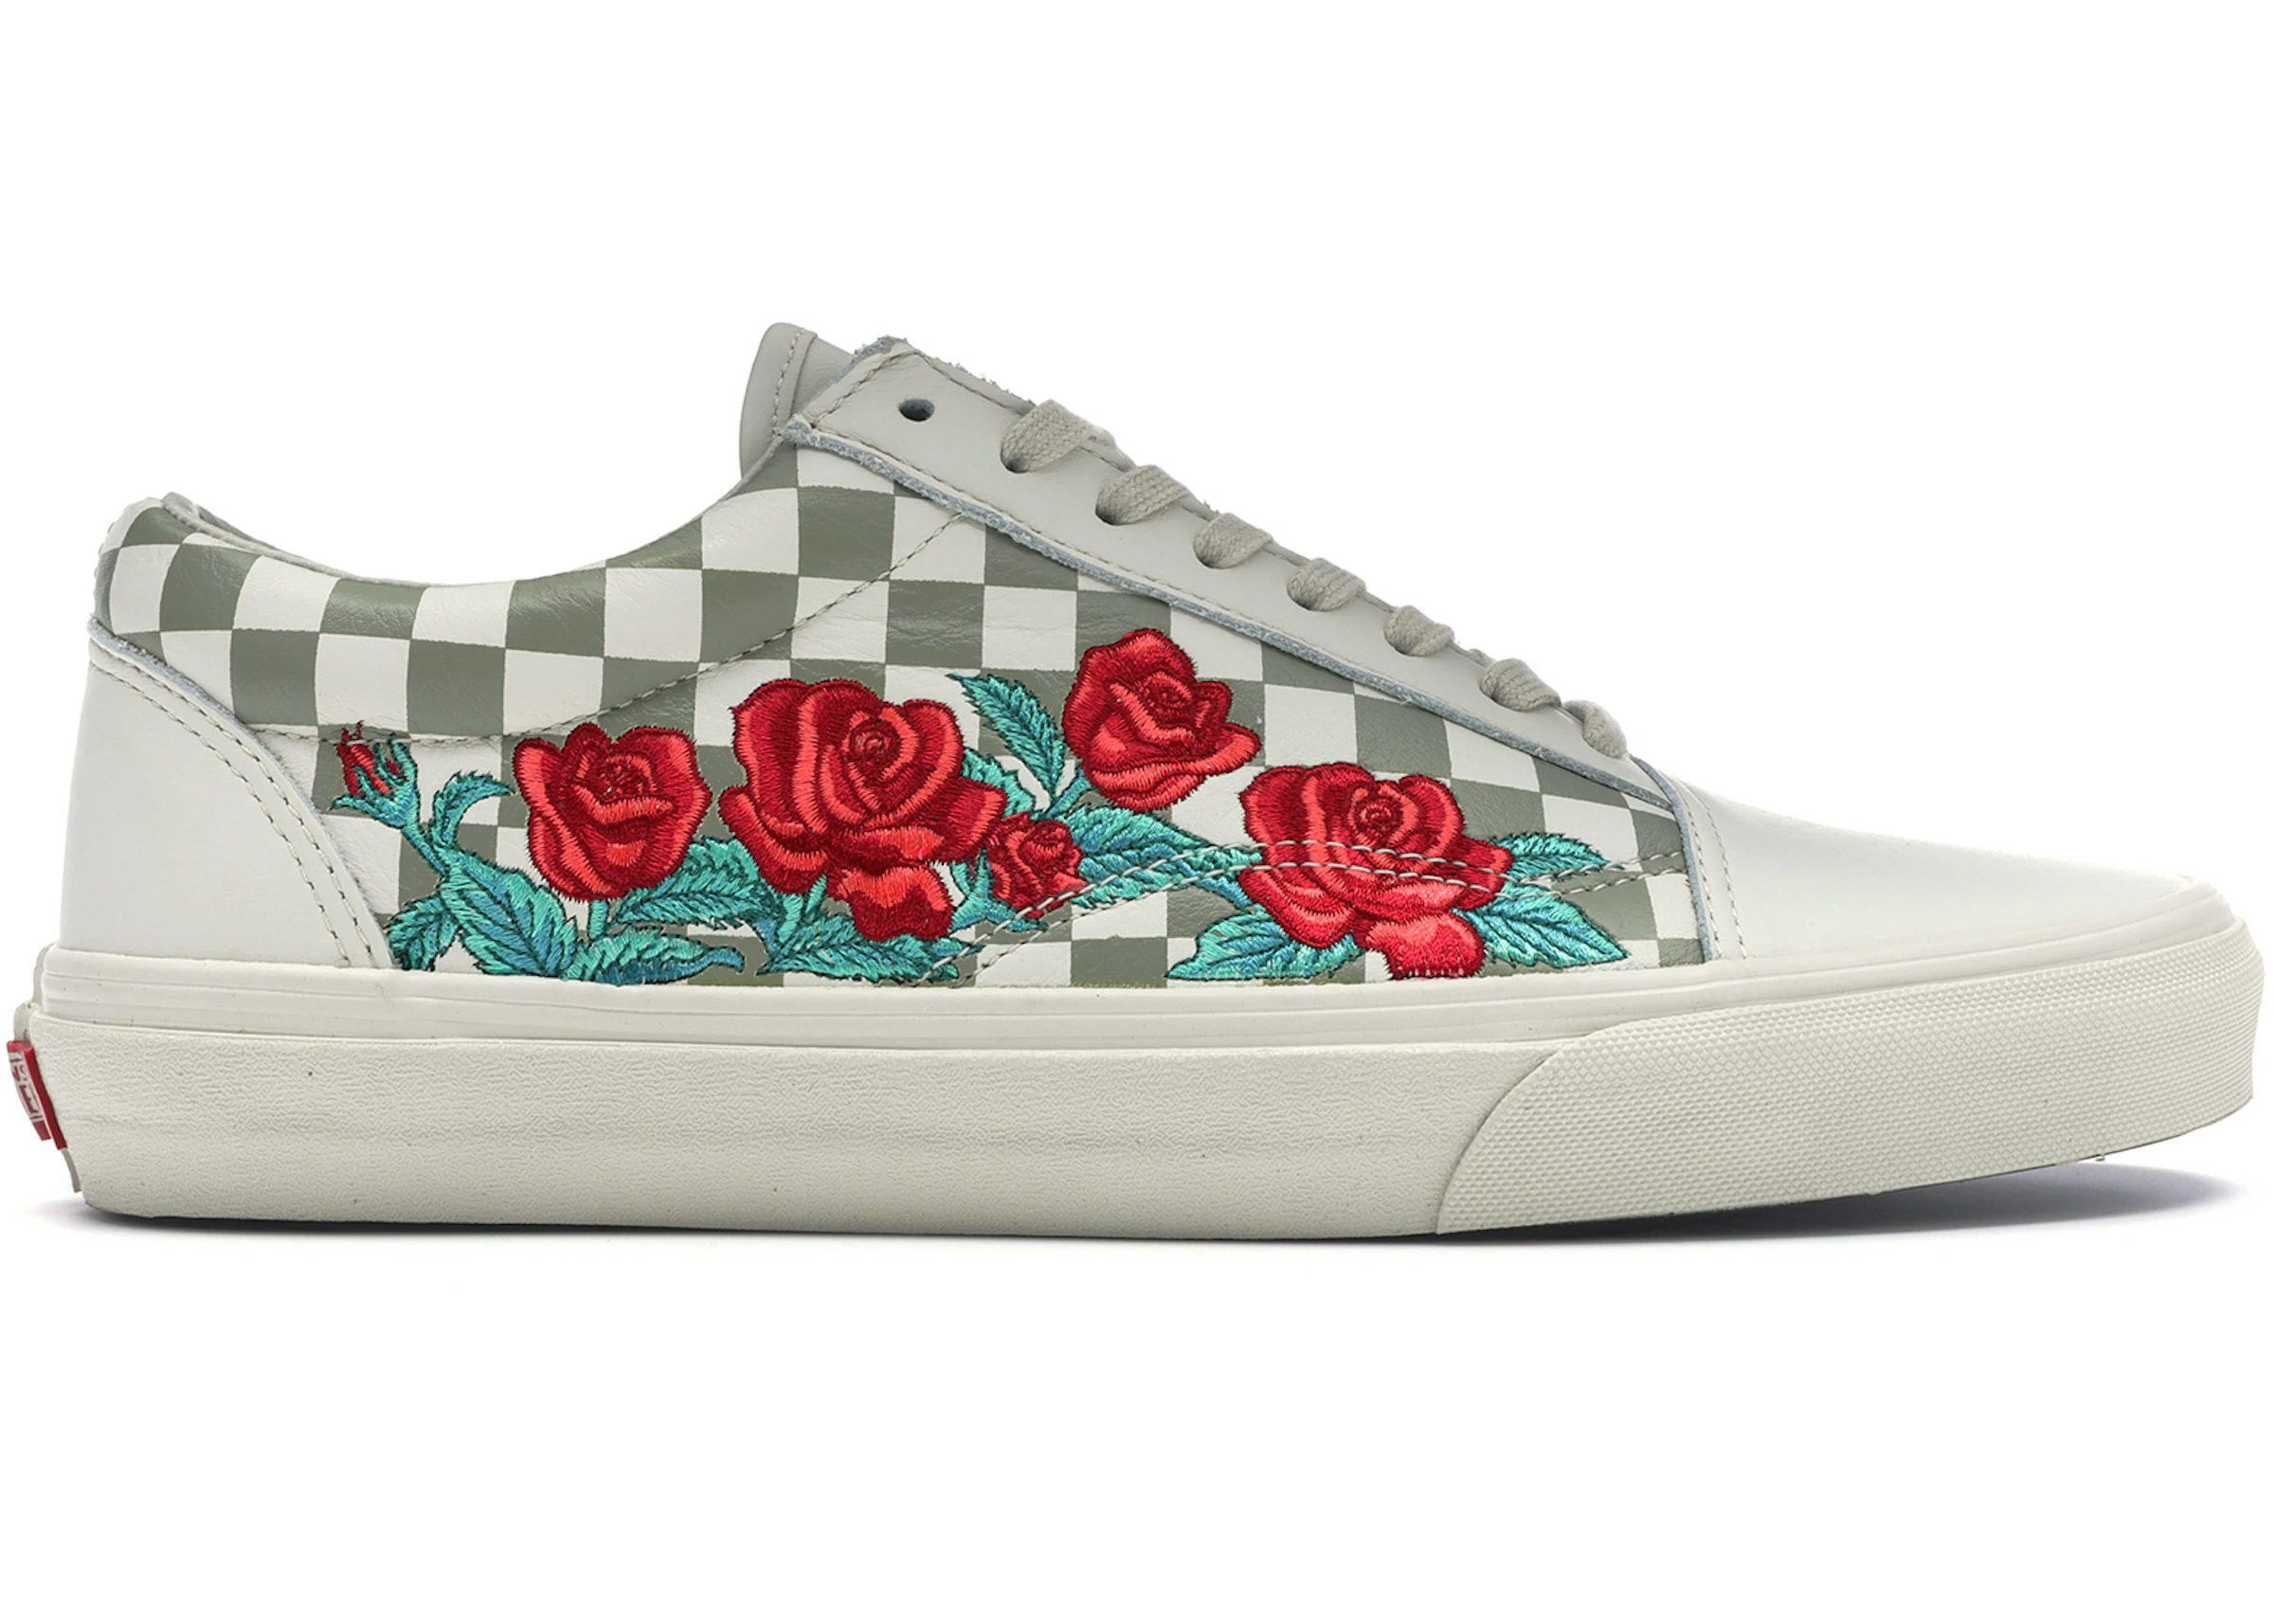 party companion effective Vans Old Skool Rose Embroidery (White) - VN0A38G3QF9 - US